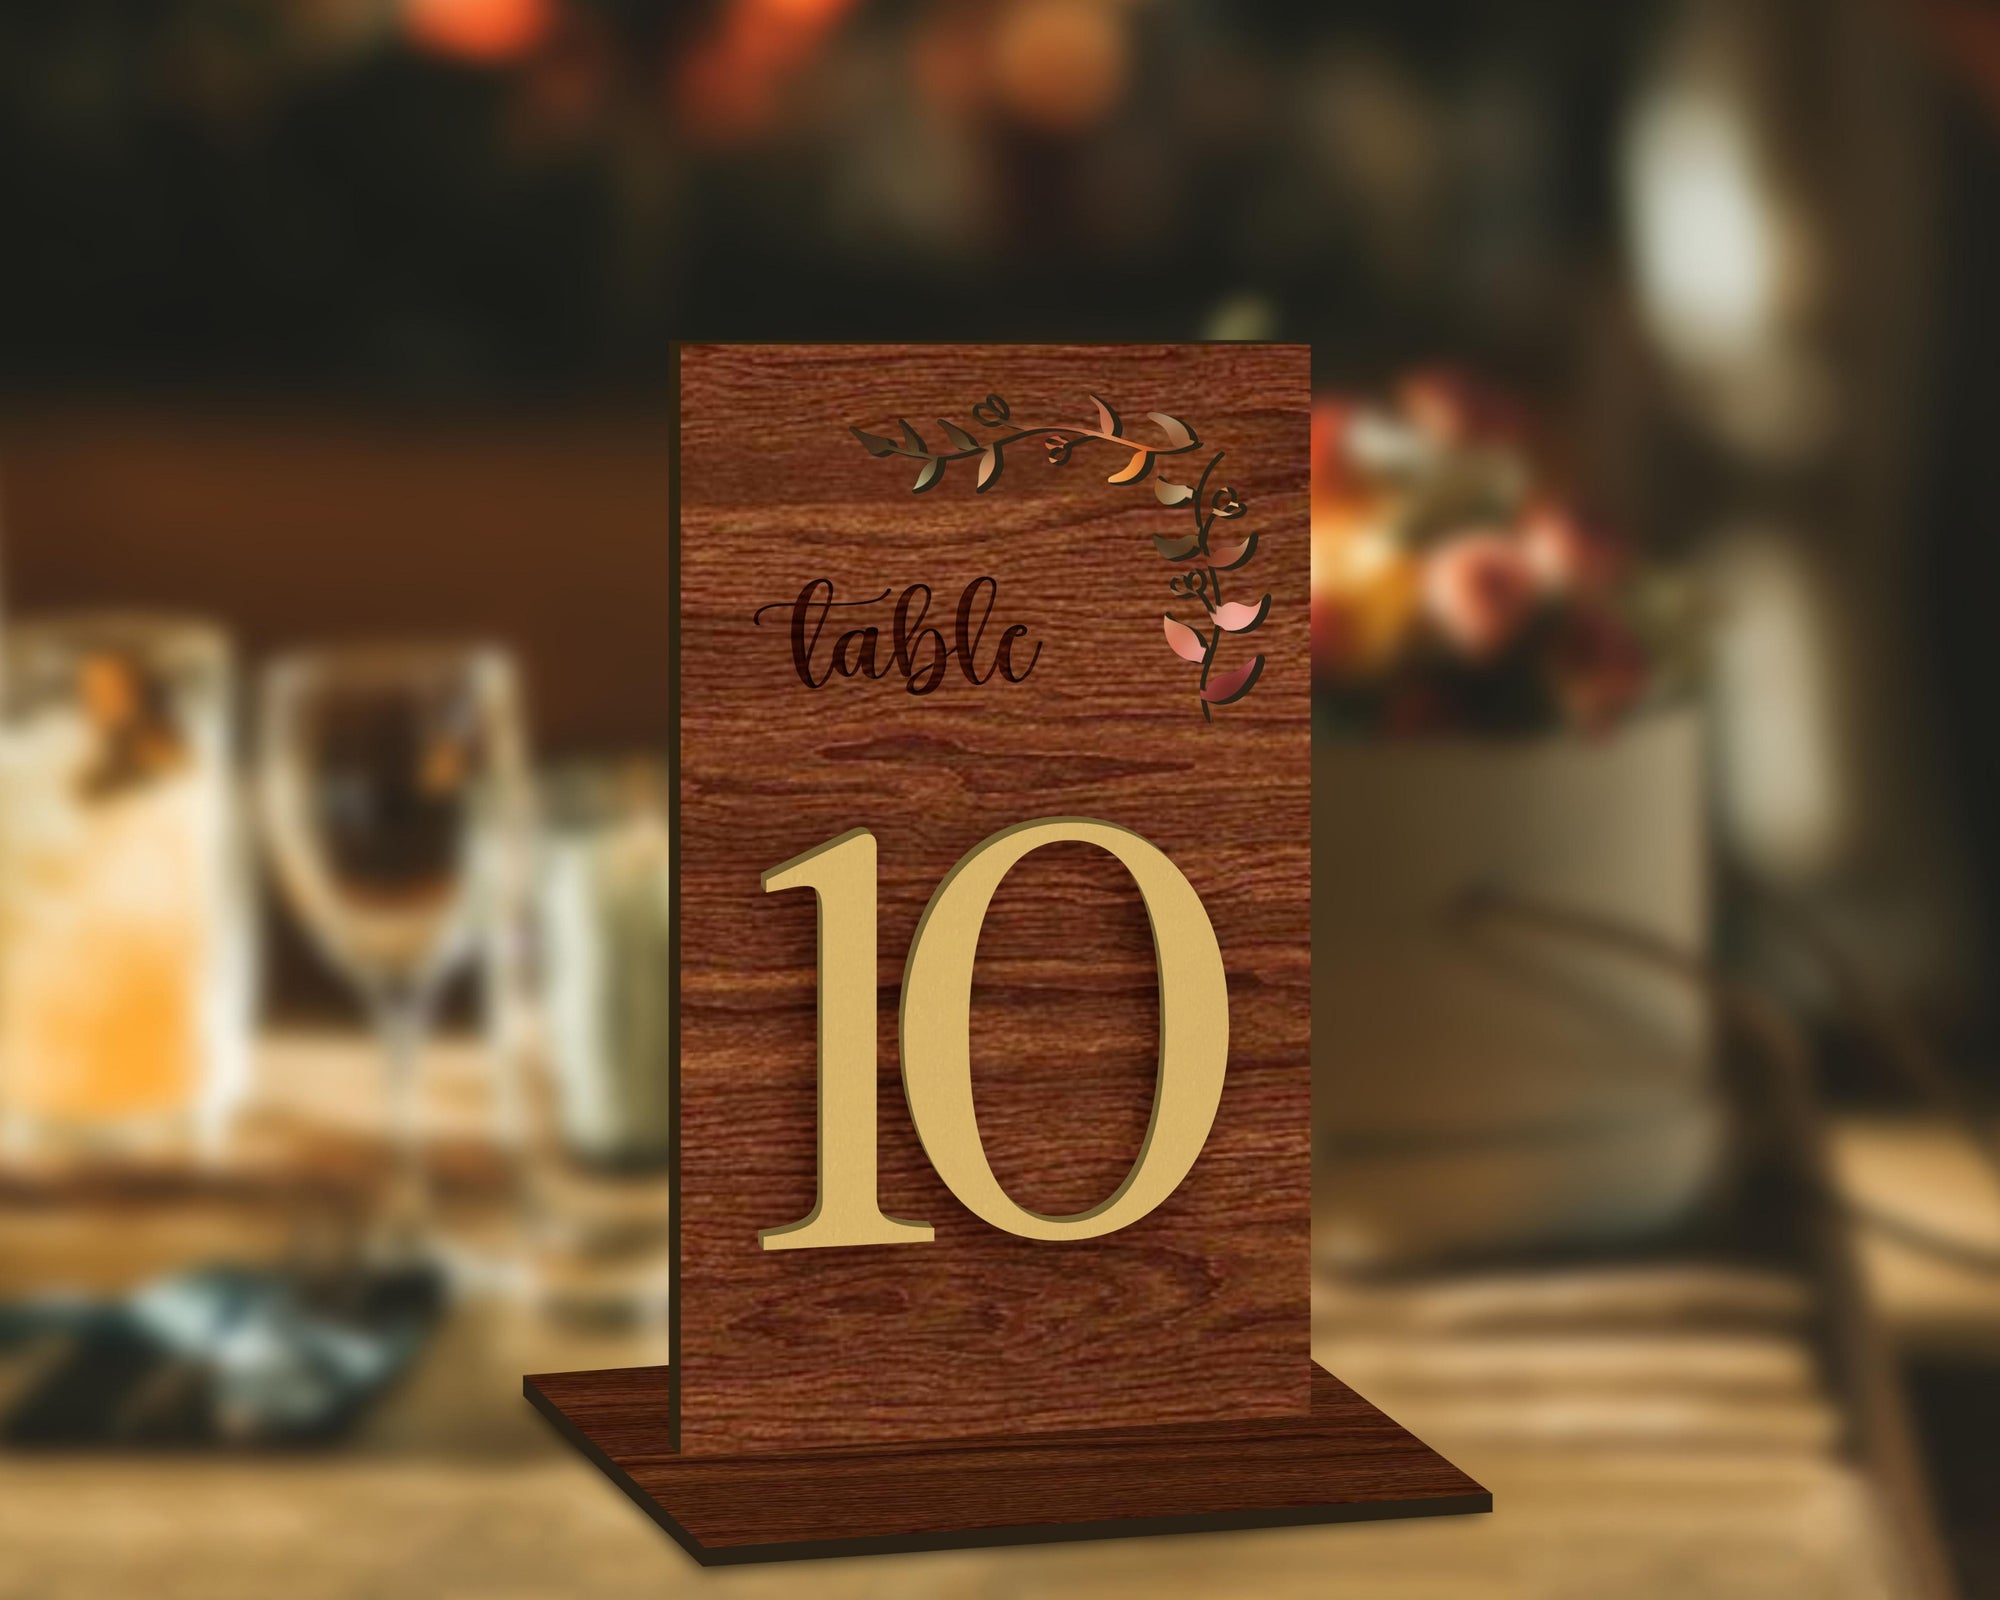 Personalised Engraving &amp; 3D Raised Wooden Laminated Plywood Wedding Table Number, Custom Tables Plaque, Wedding Decor Ceremony Event Signs